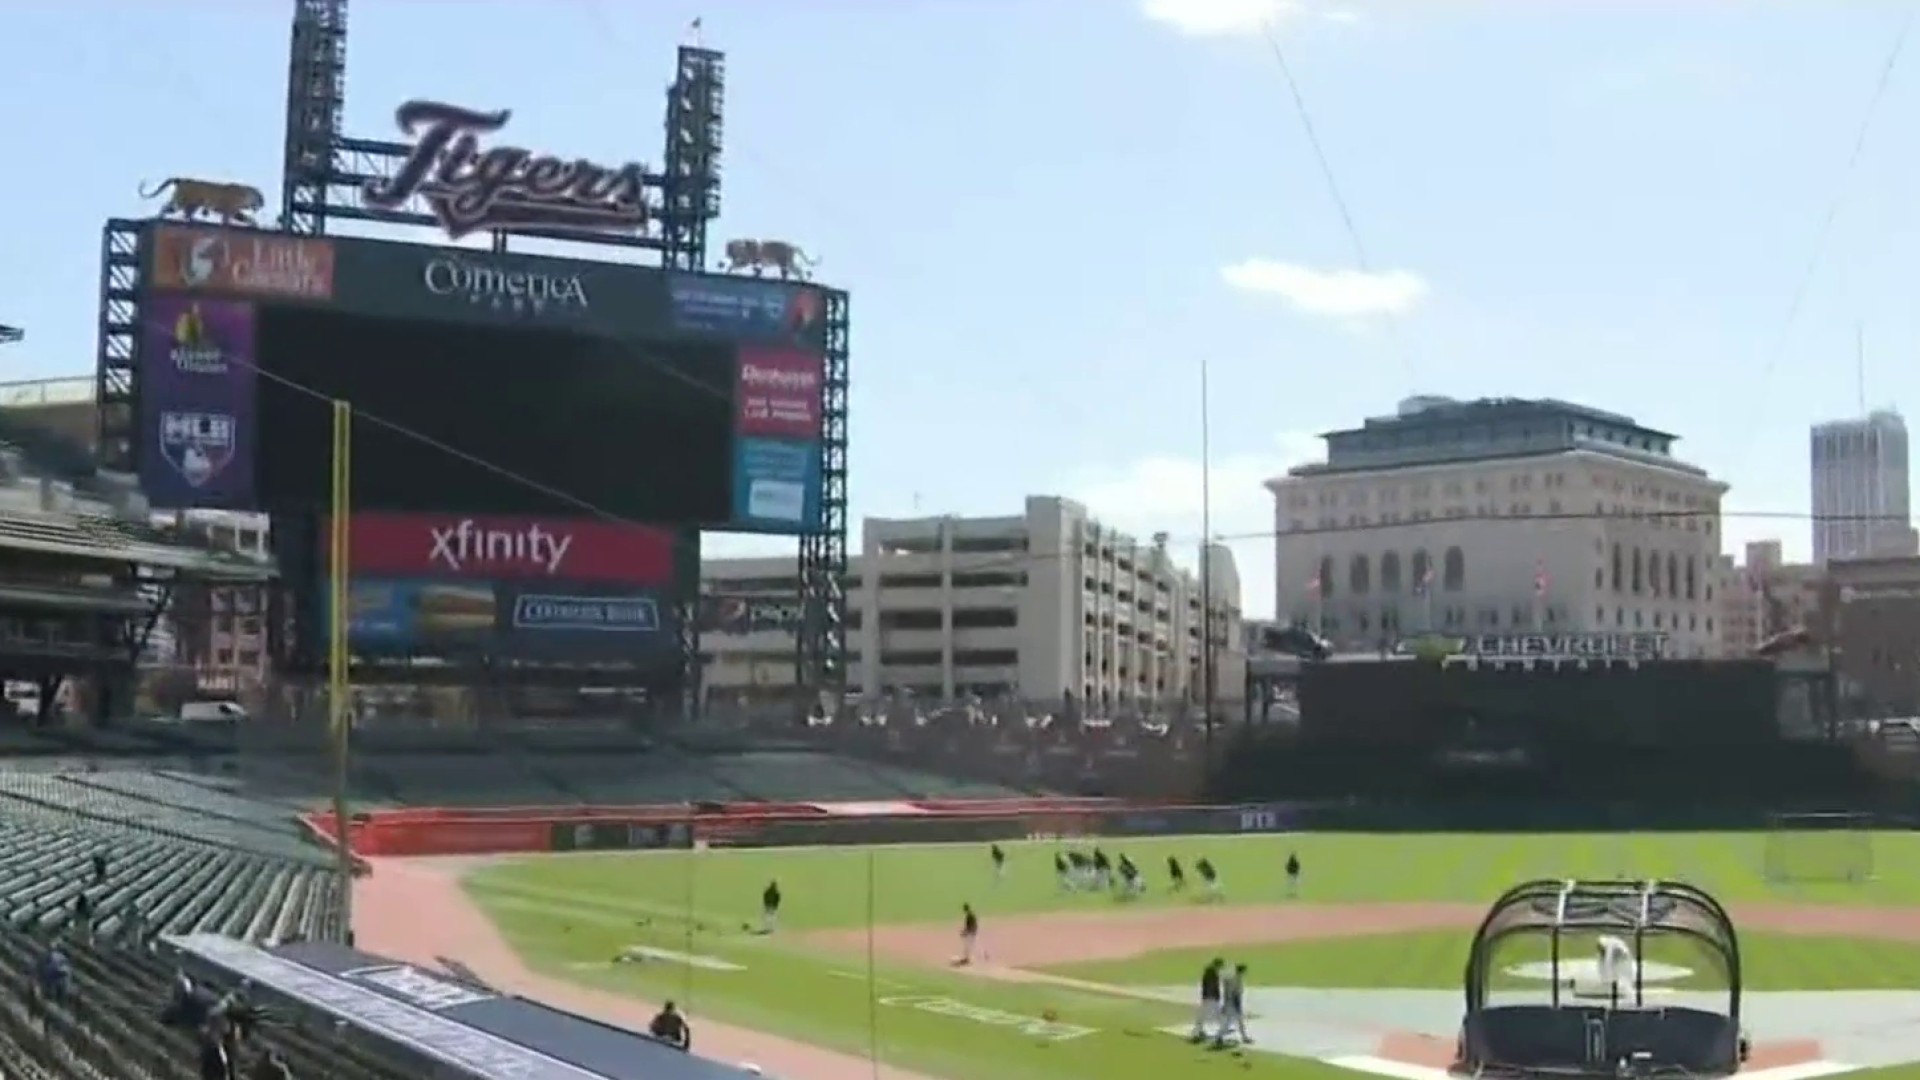 Tigers preparing for home opener at Comerica Park 